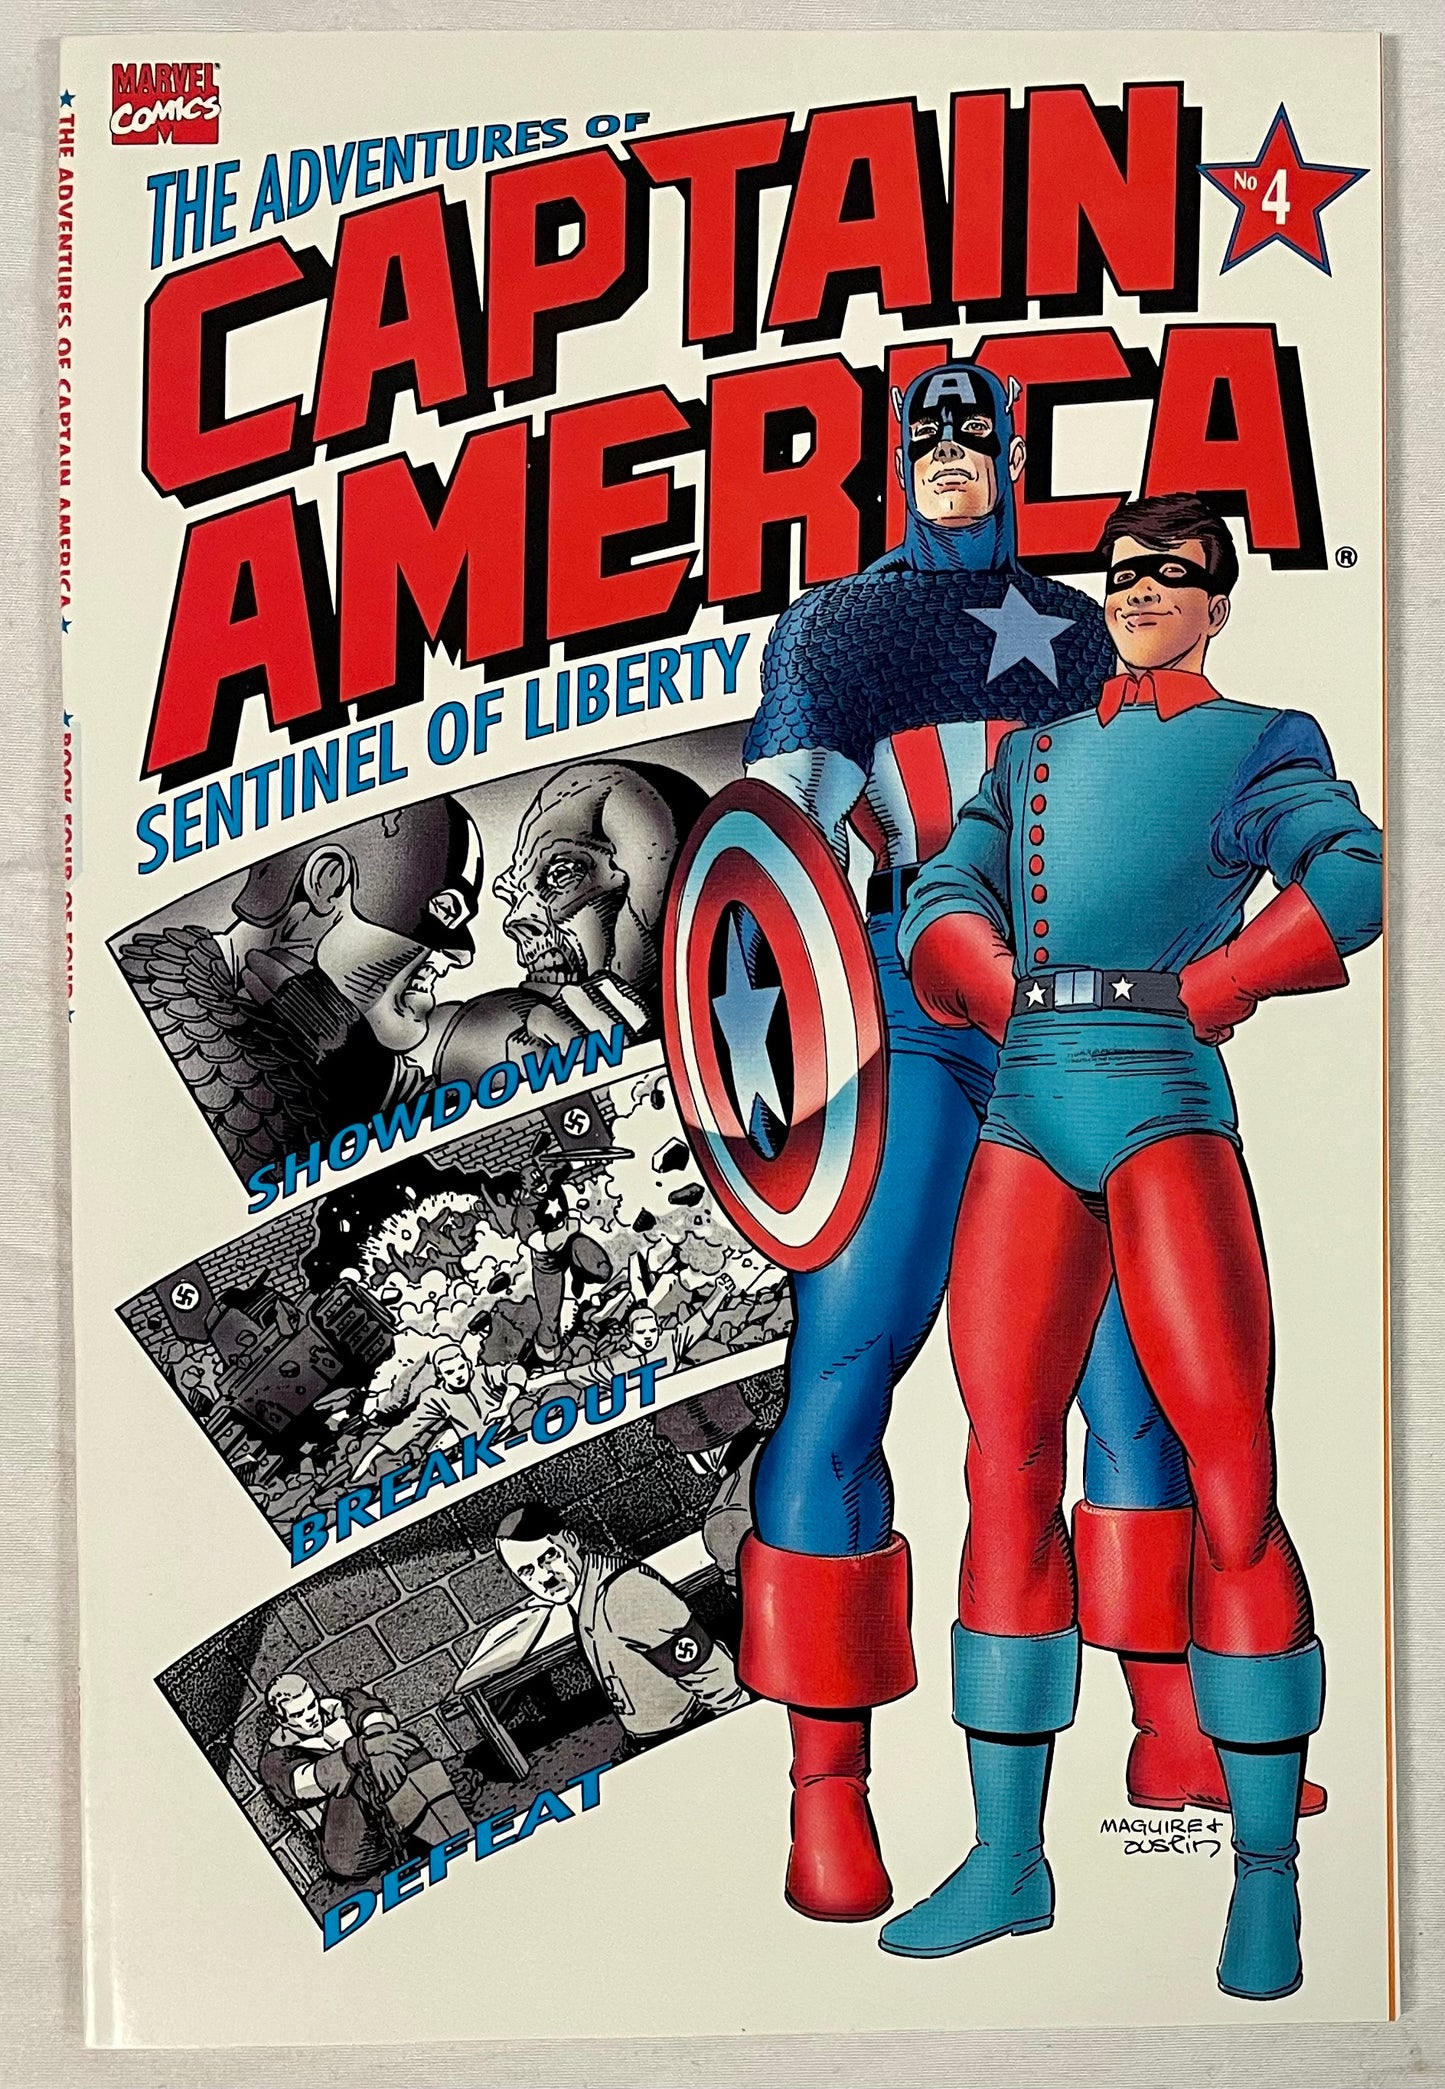 Marvel Comics The Adventures of Captain America Issue 4 of 4